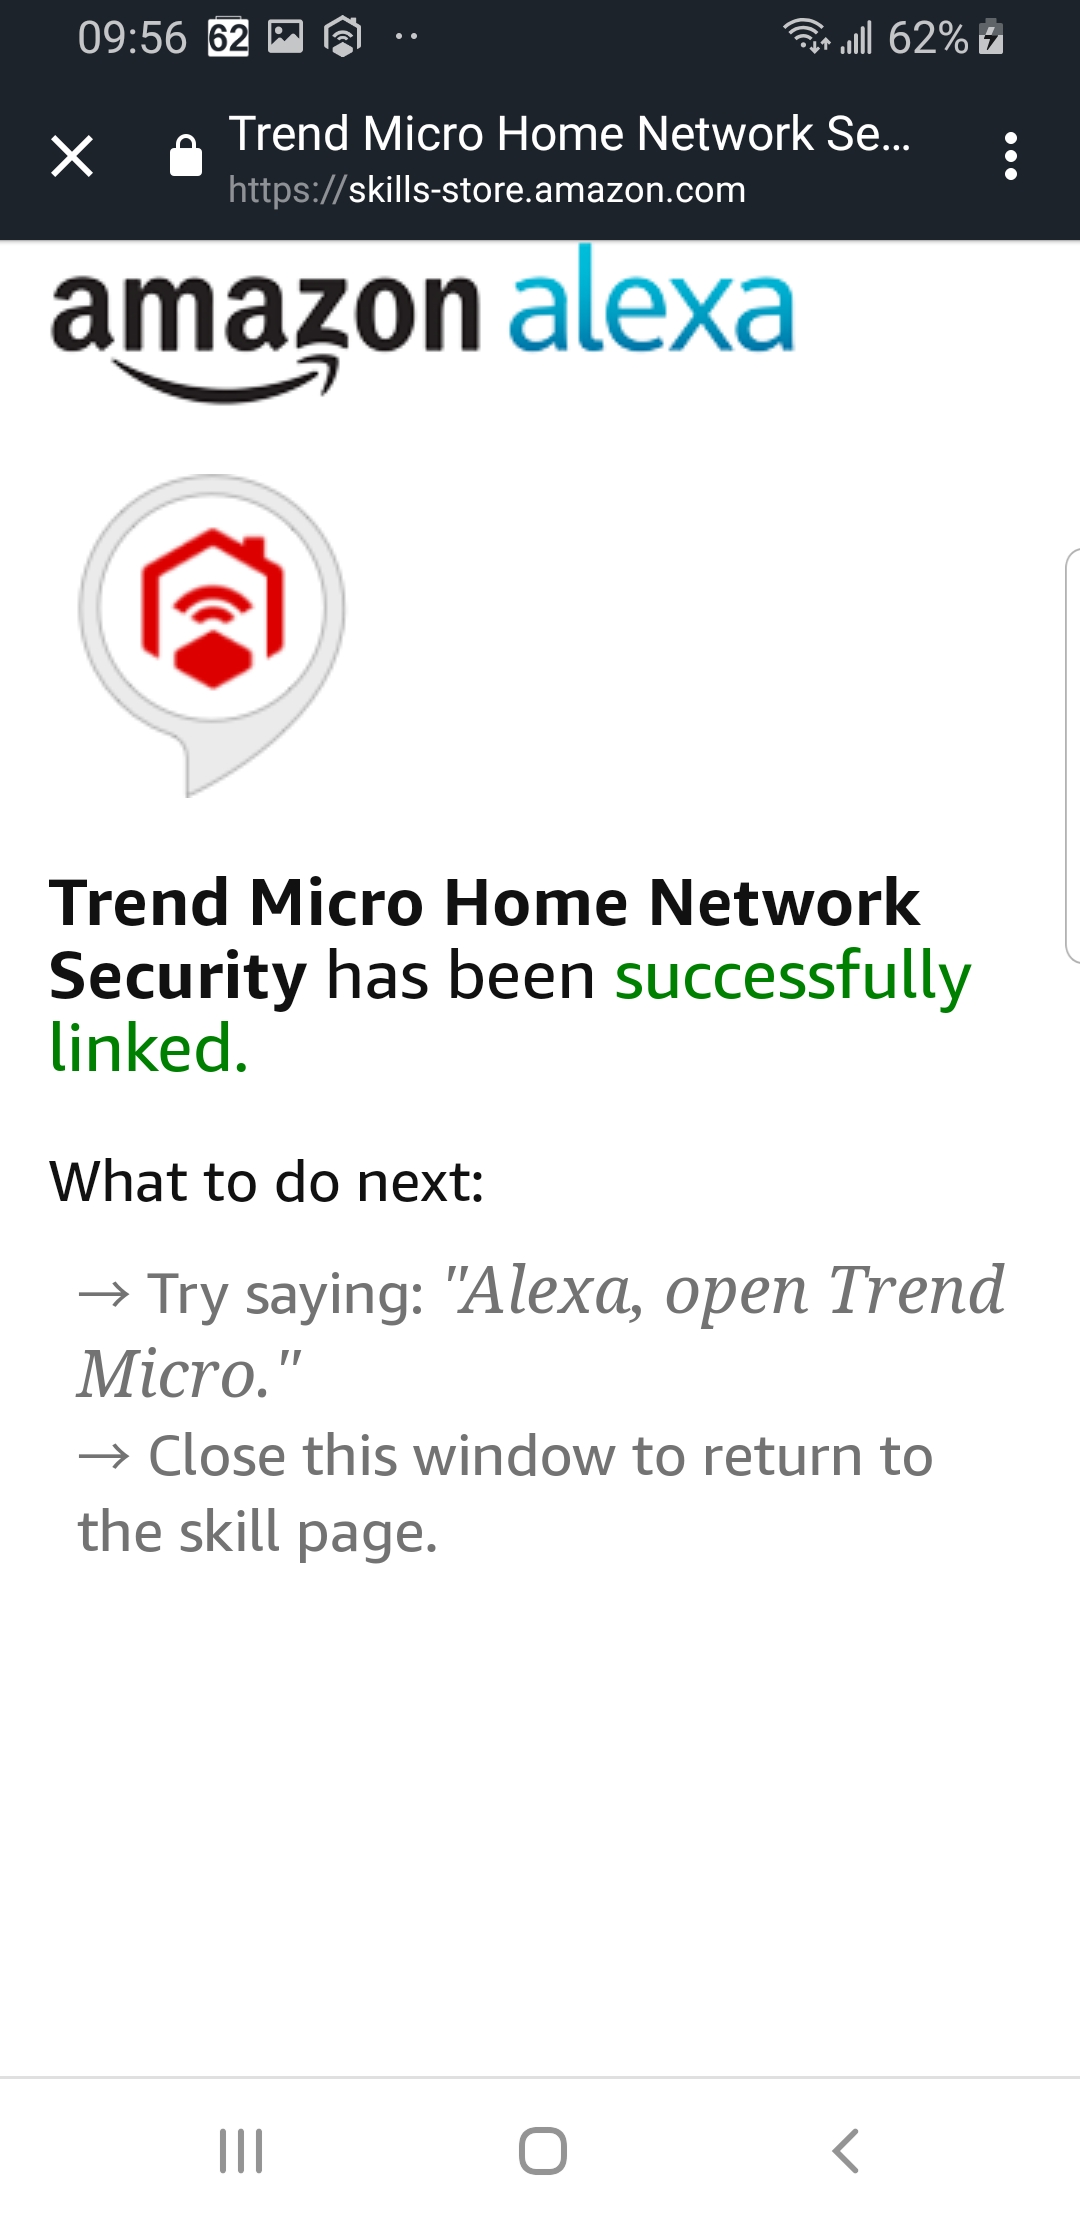 Trend Micro Home Network Security has been successfully linked to Alexa